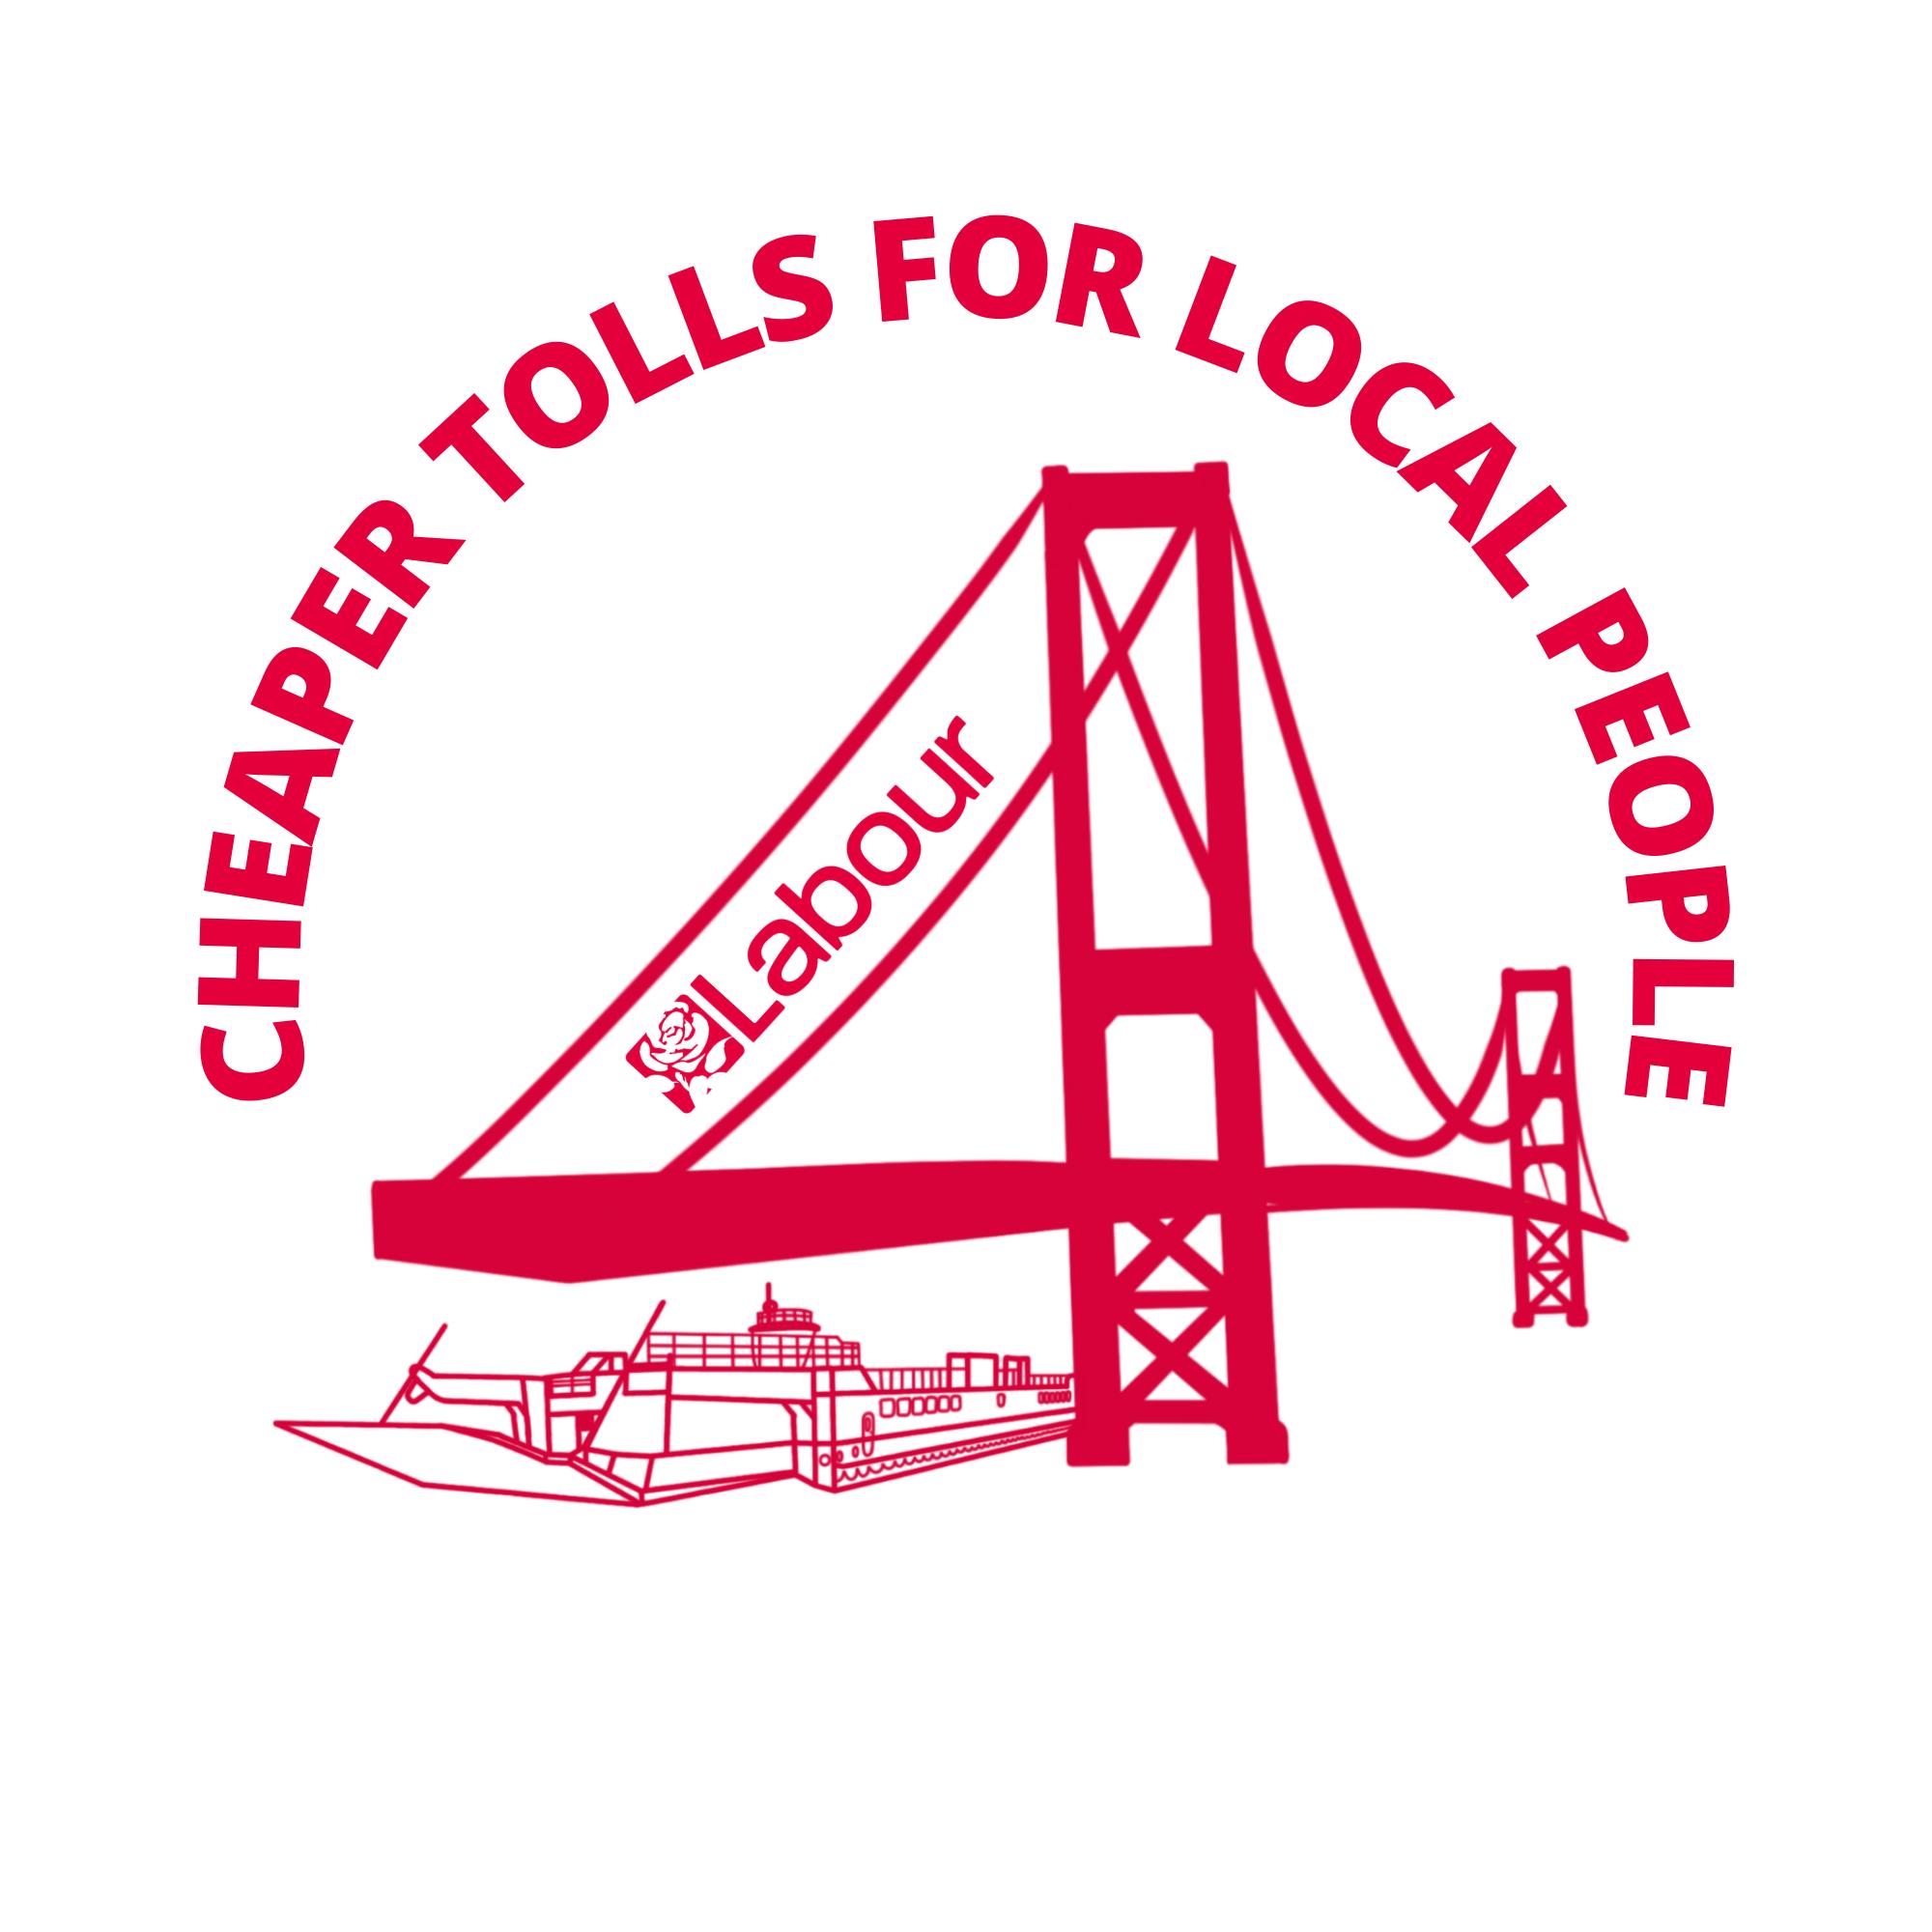 Cheaper tolls for local people